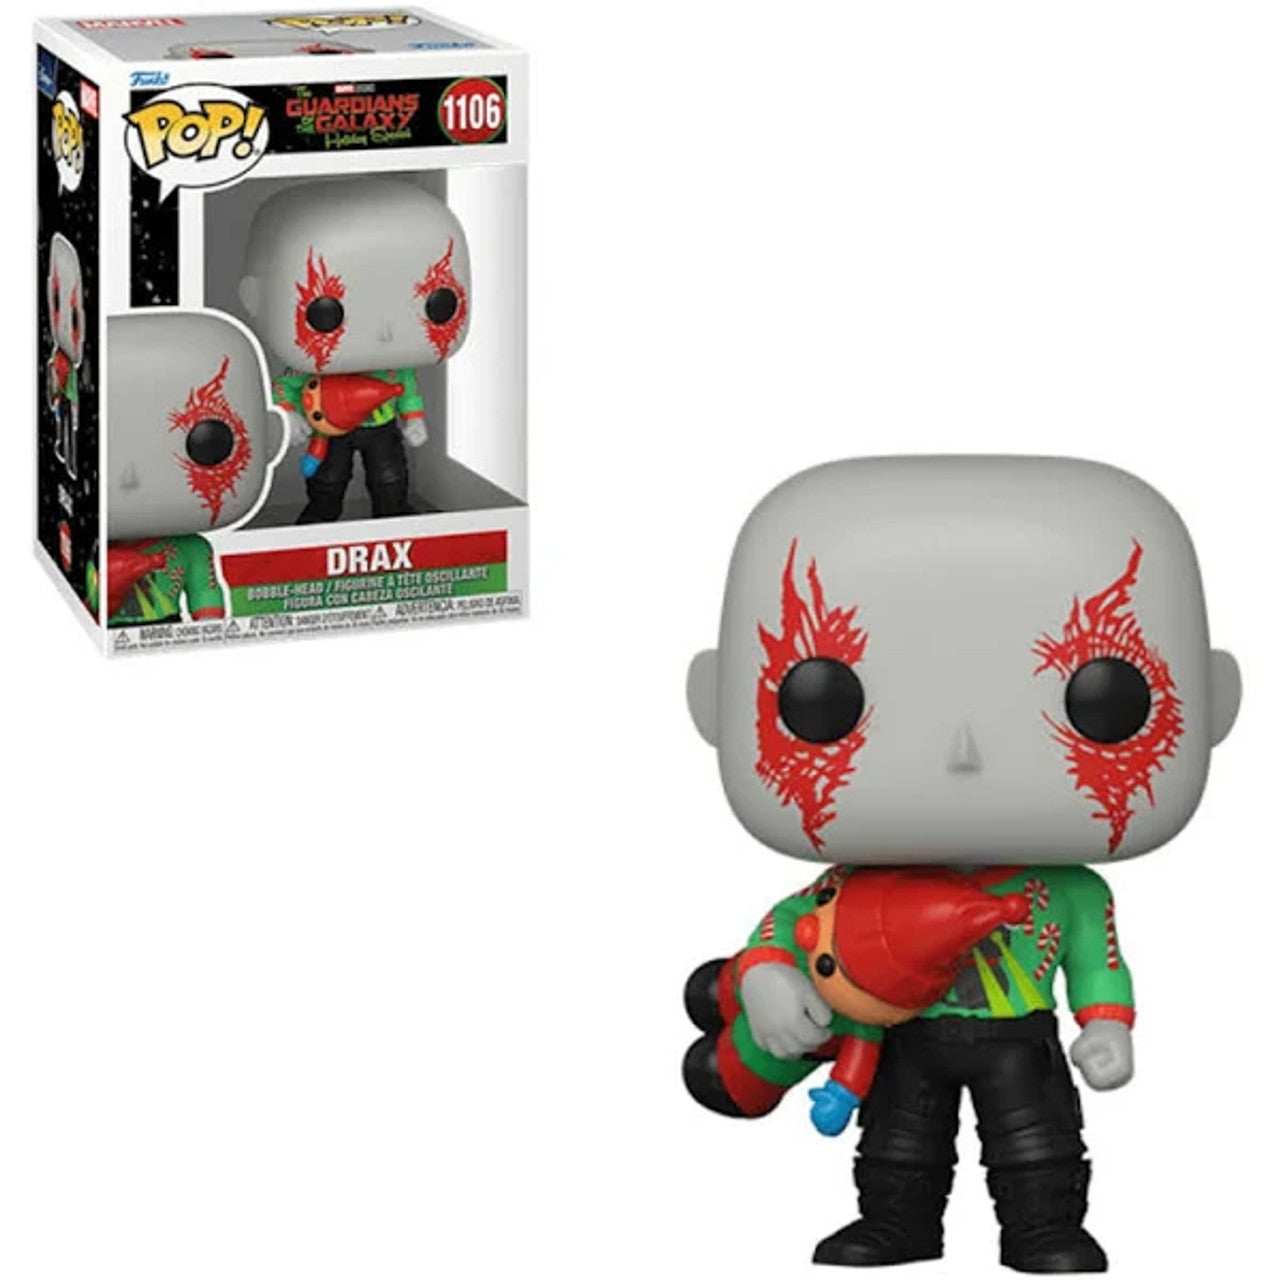 Pop! Drax 1106 The Guardians Of The Galaxy